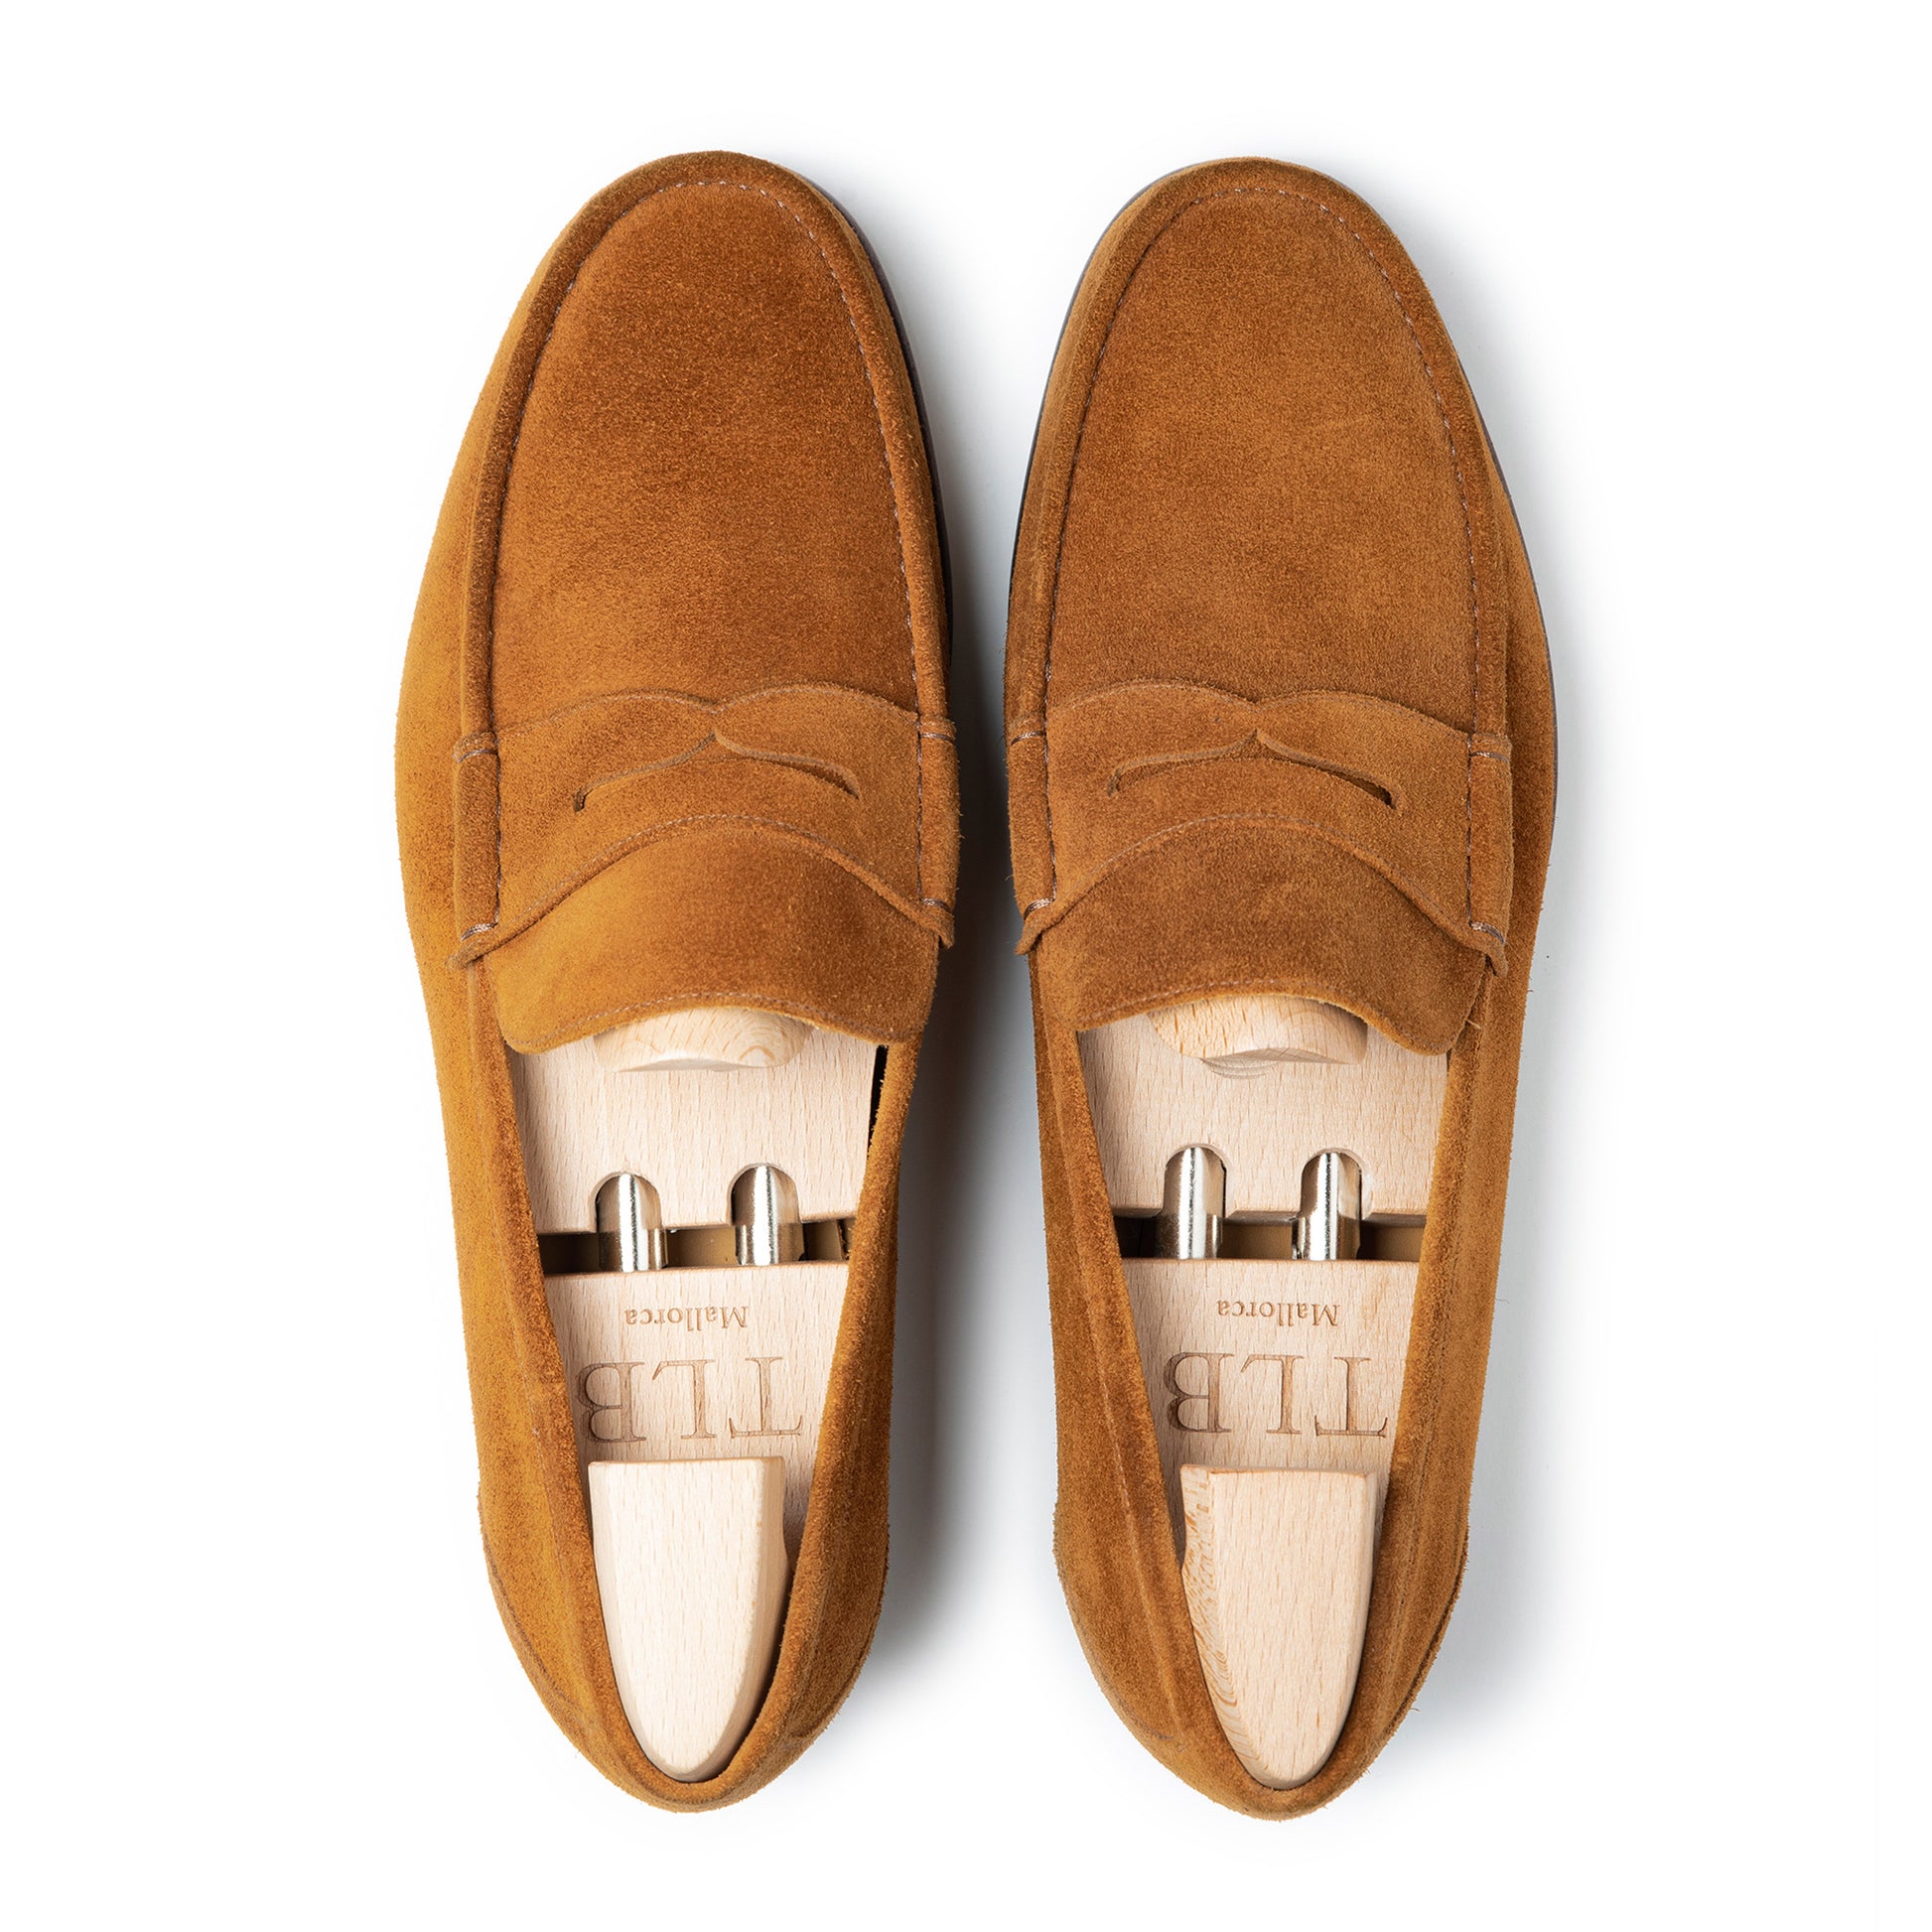 TLB Mallorca Oxford loafers | Men's Oxford shoes | 2510 suede brown